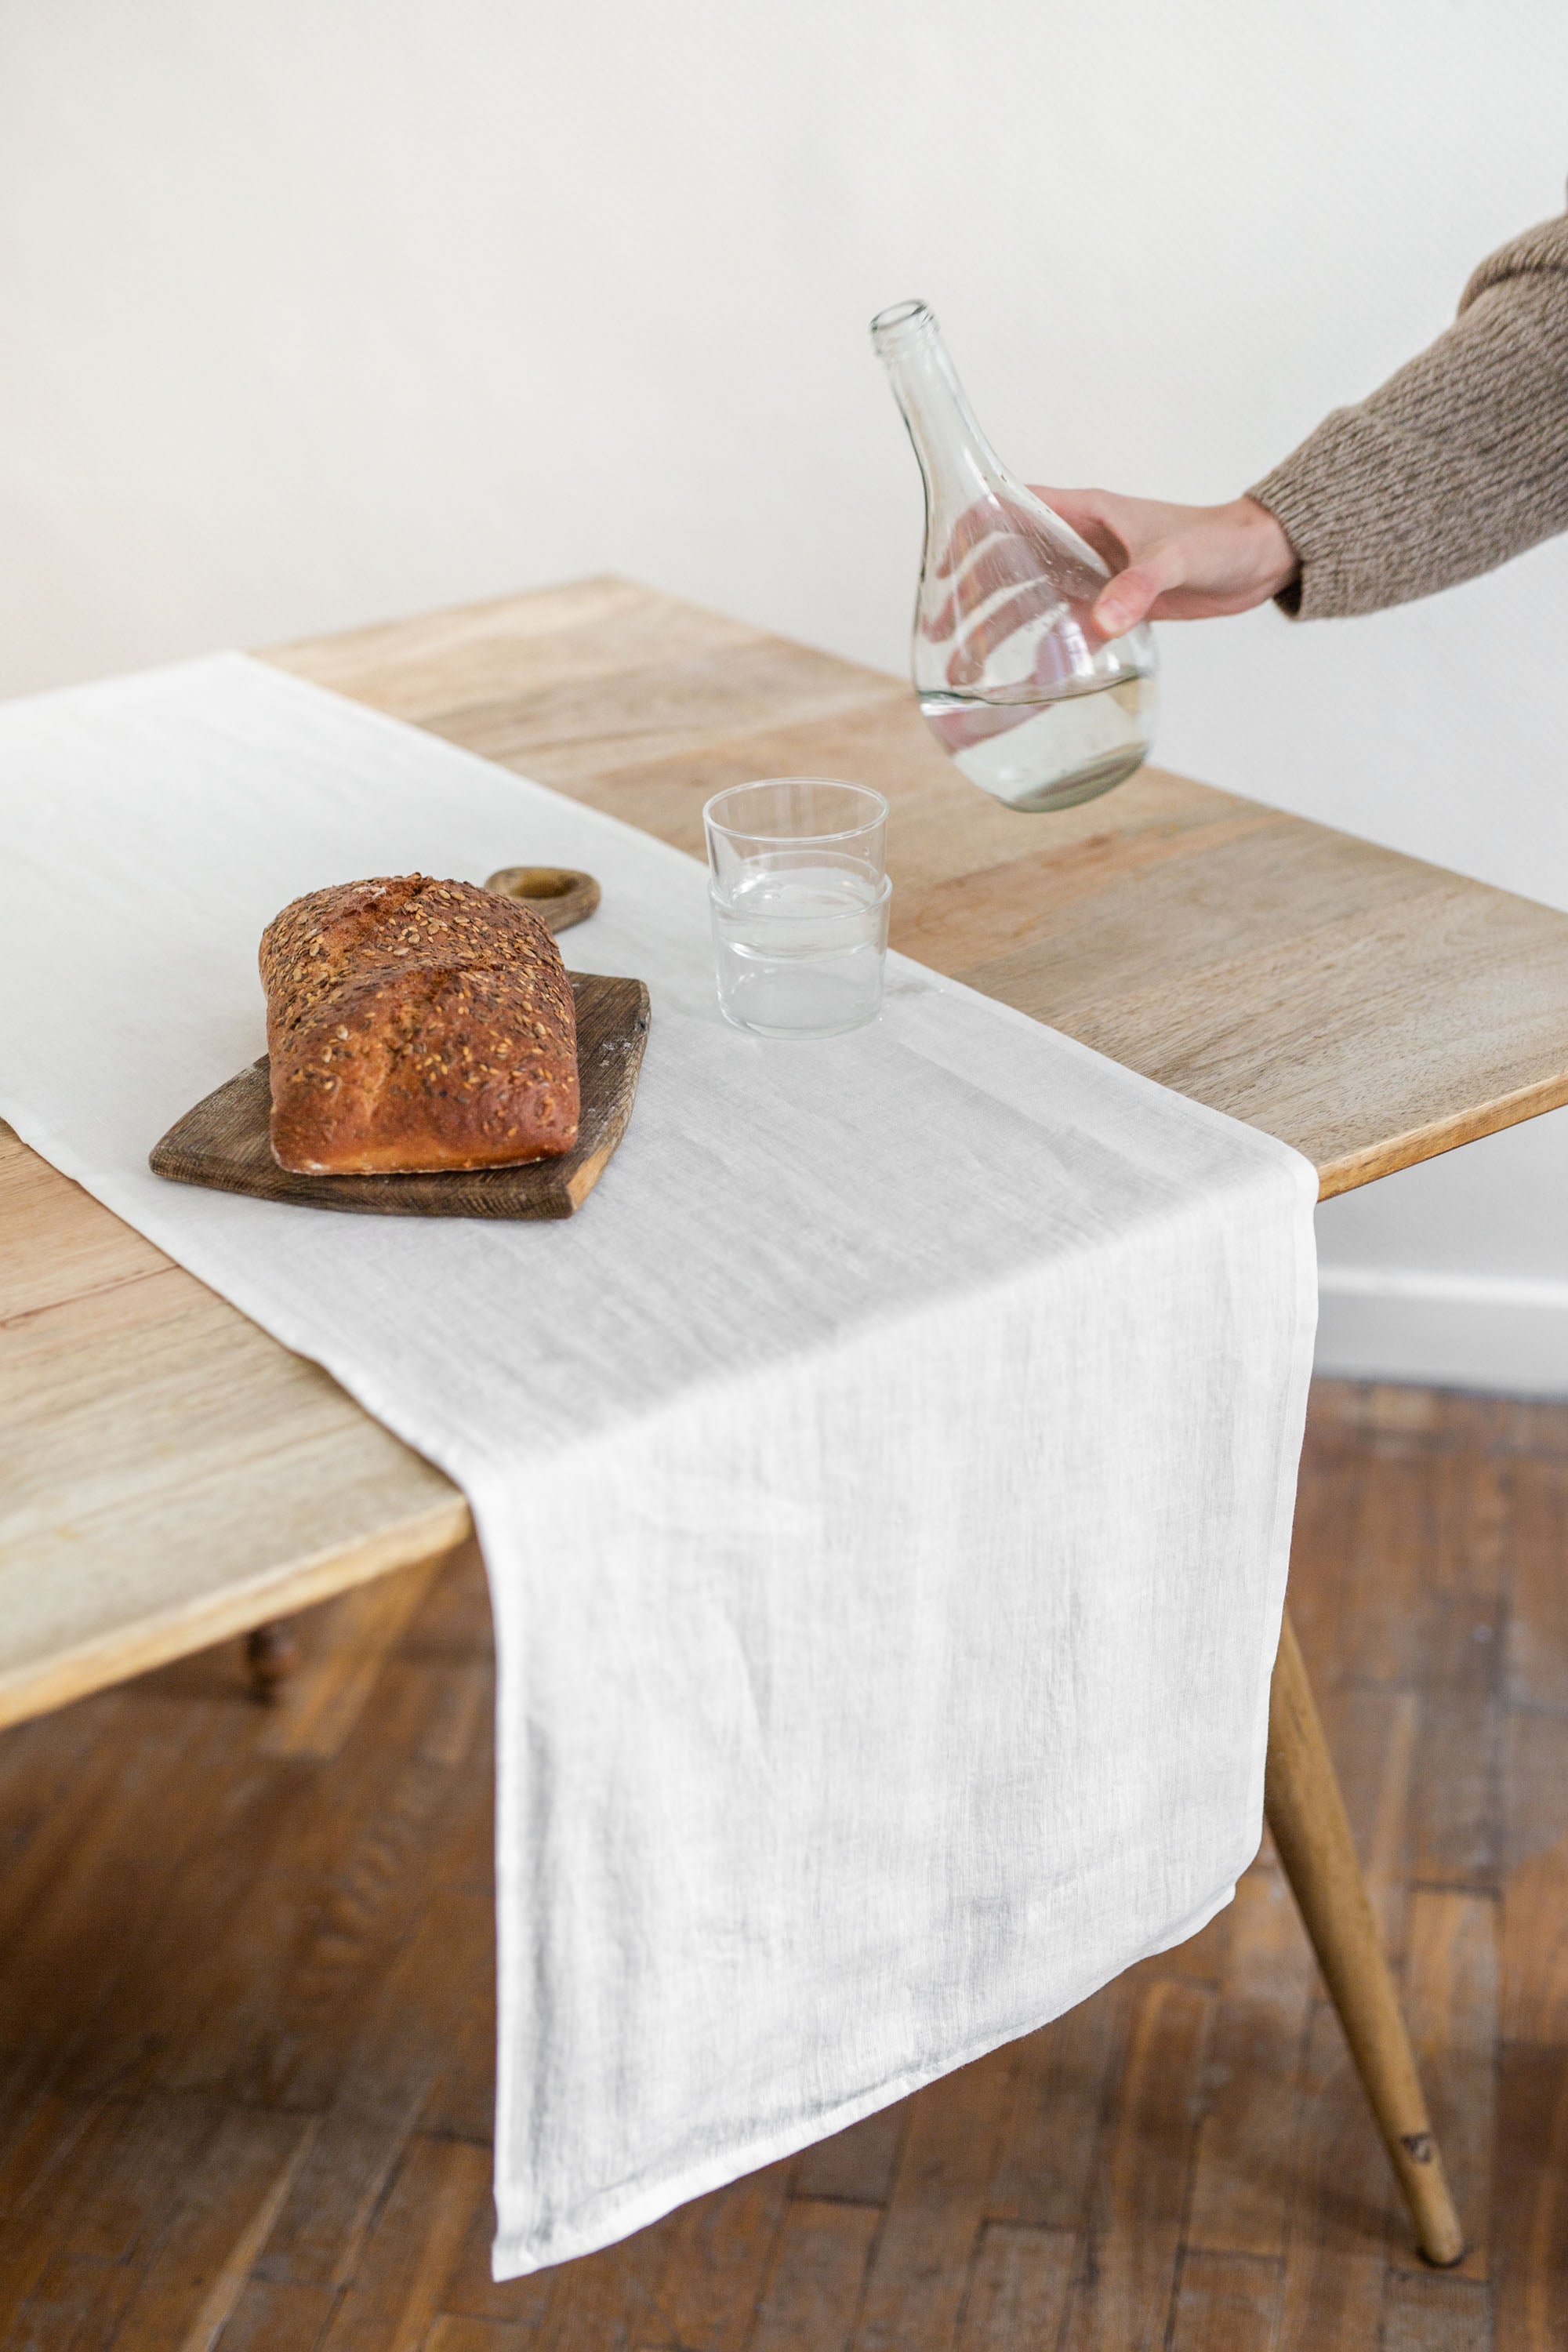 Load Of Bread On Rustic Dinner Table With White Linen Table Runner By AmourlInen